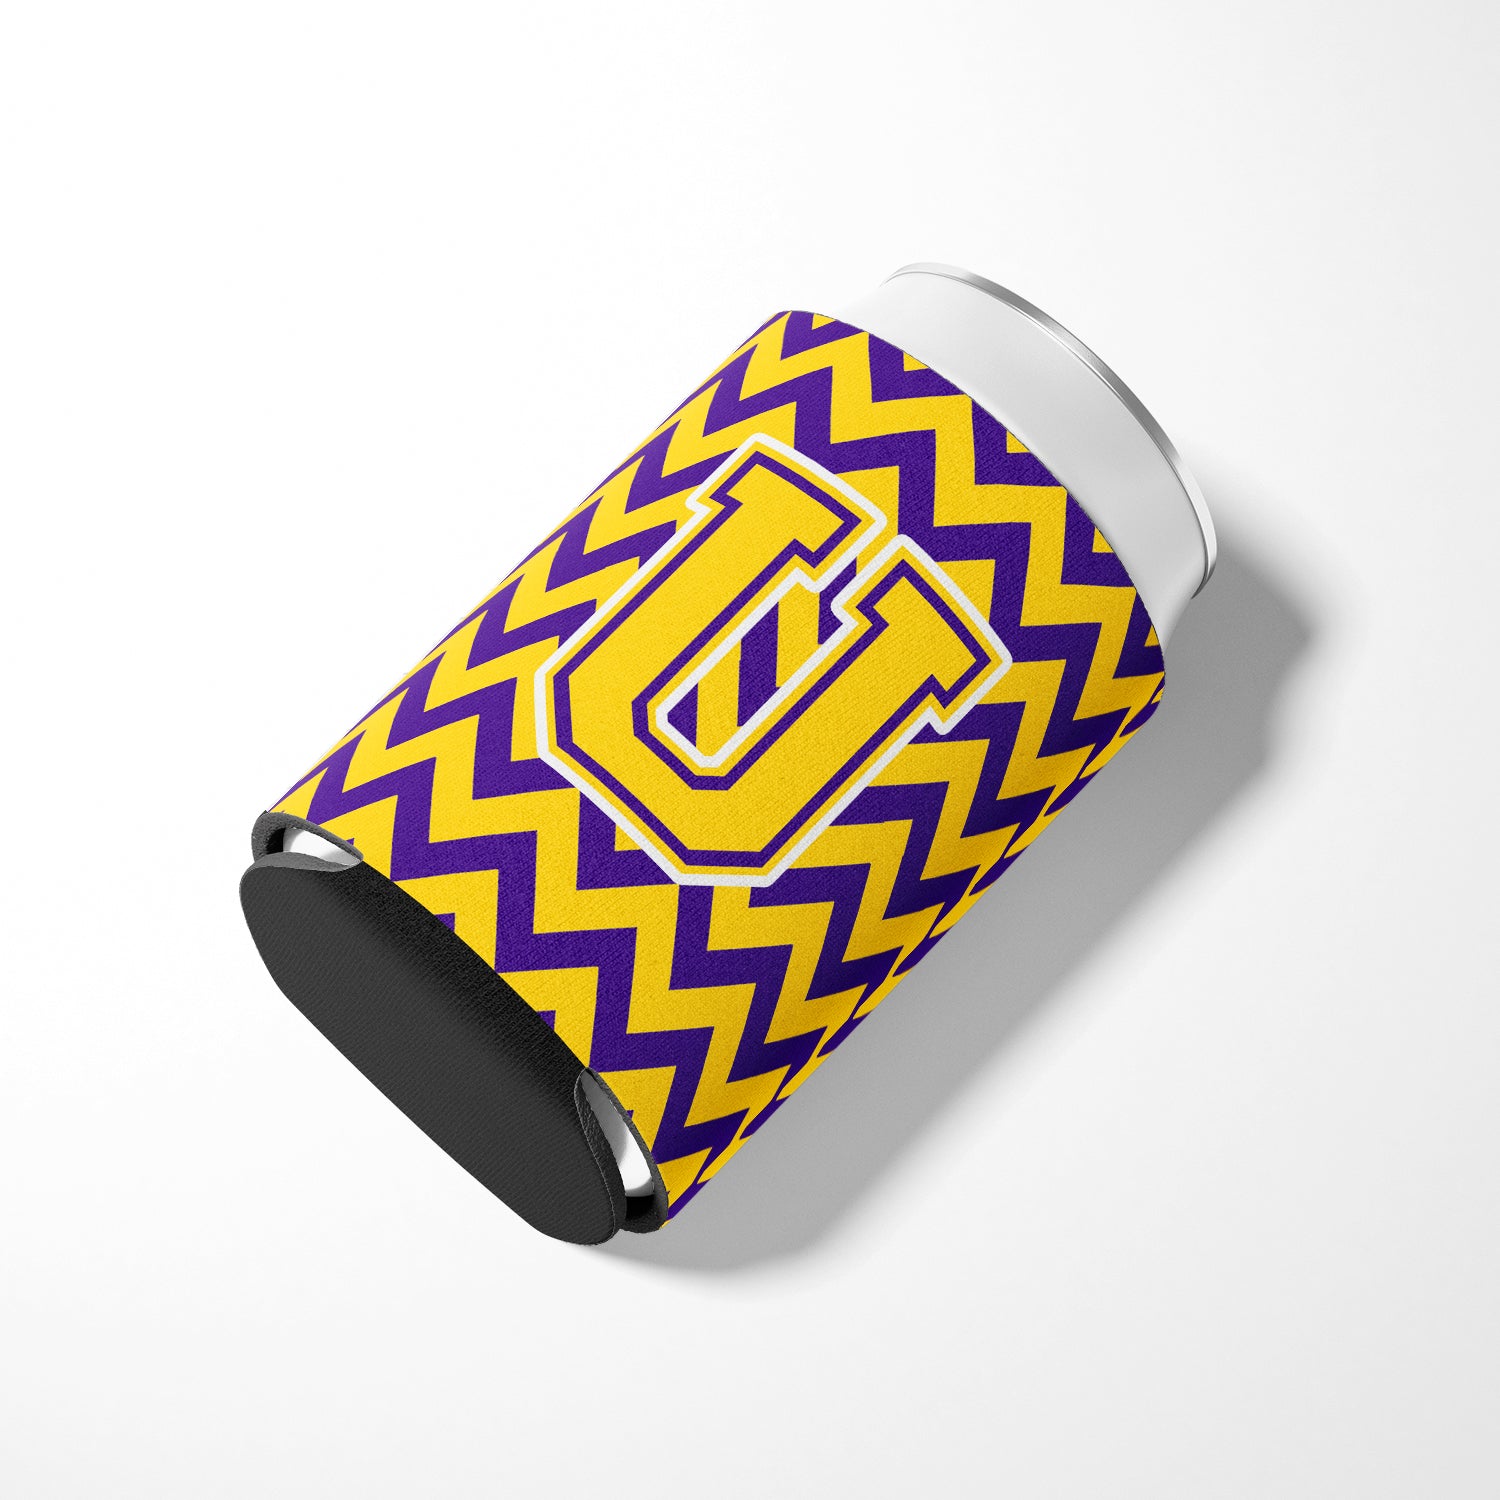 Letter U Chevron Purple and Gold Can or Bottle Hugger CJ1041-UCC.